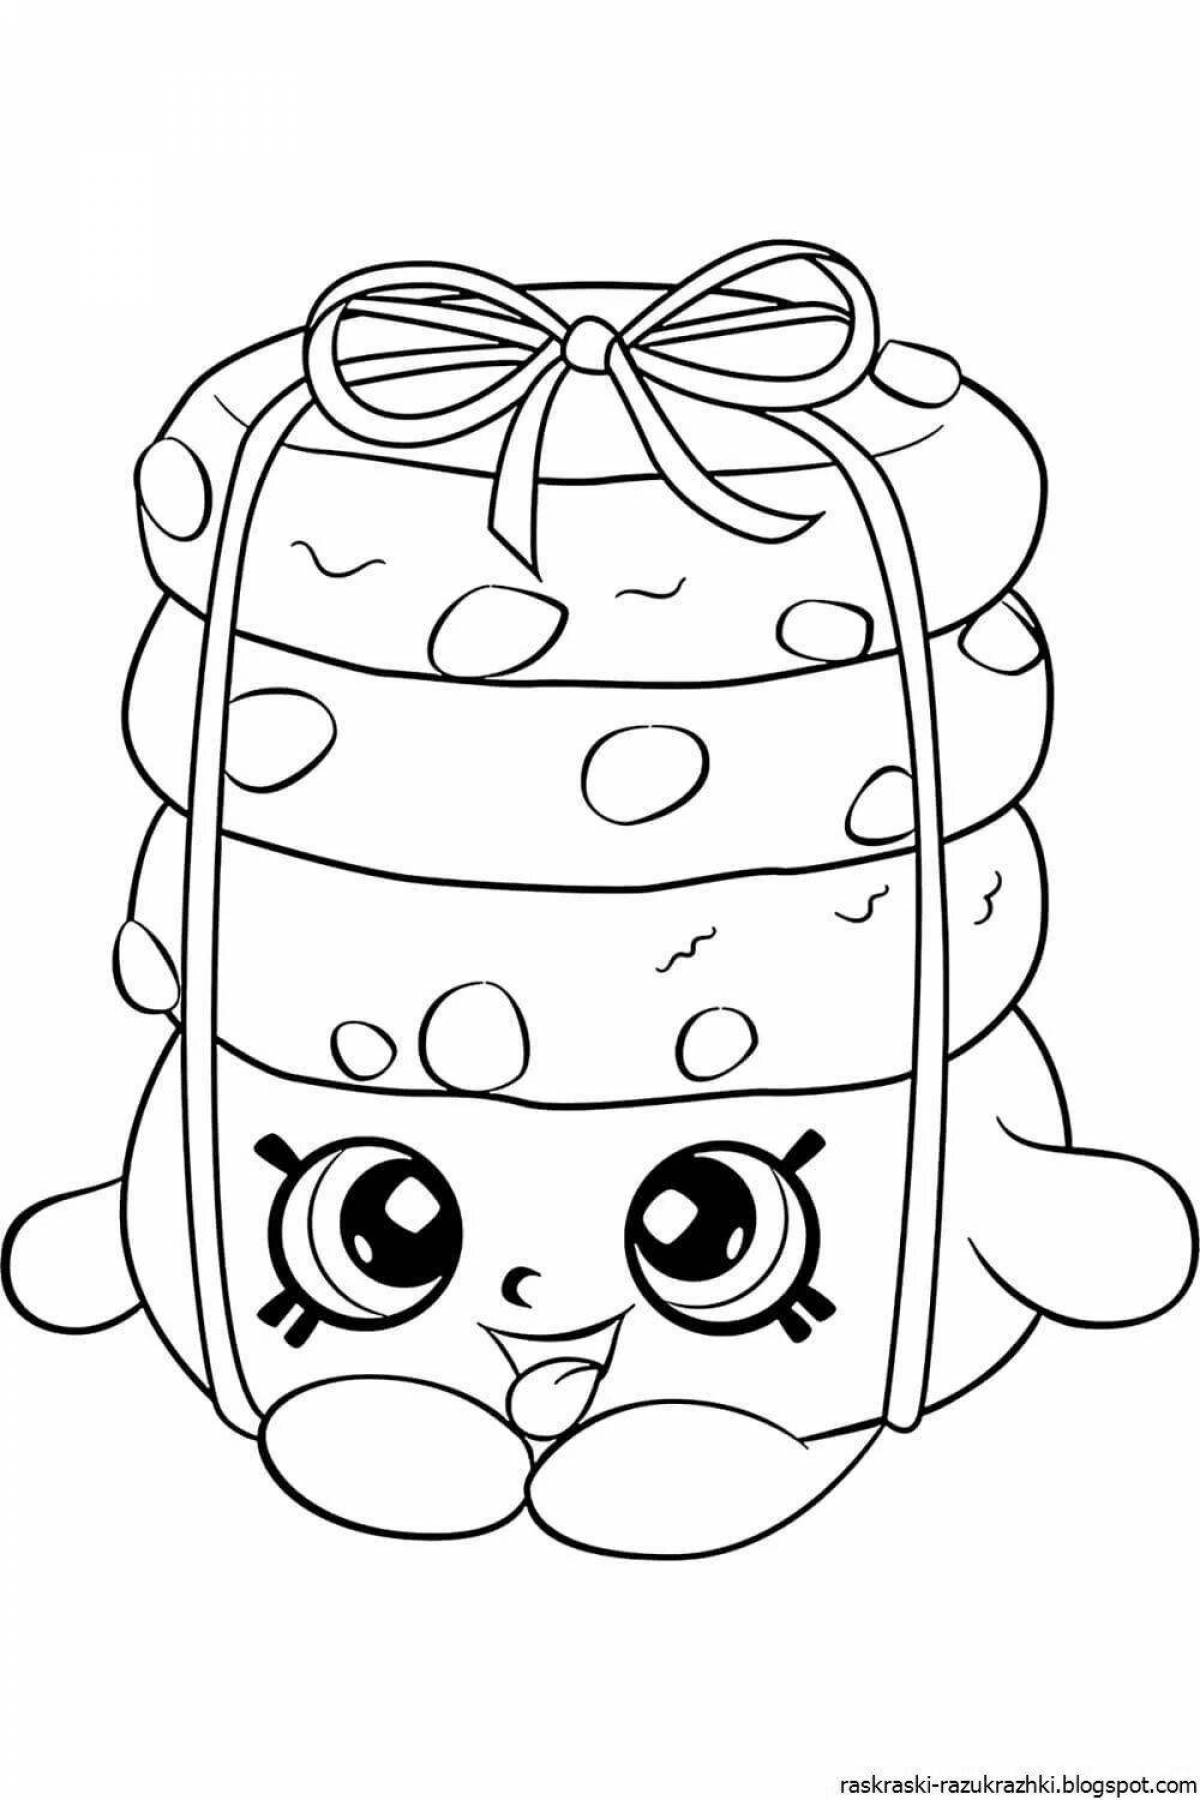 Sweet shopkins coloring pages for girls